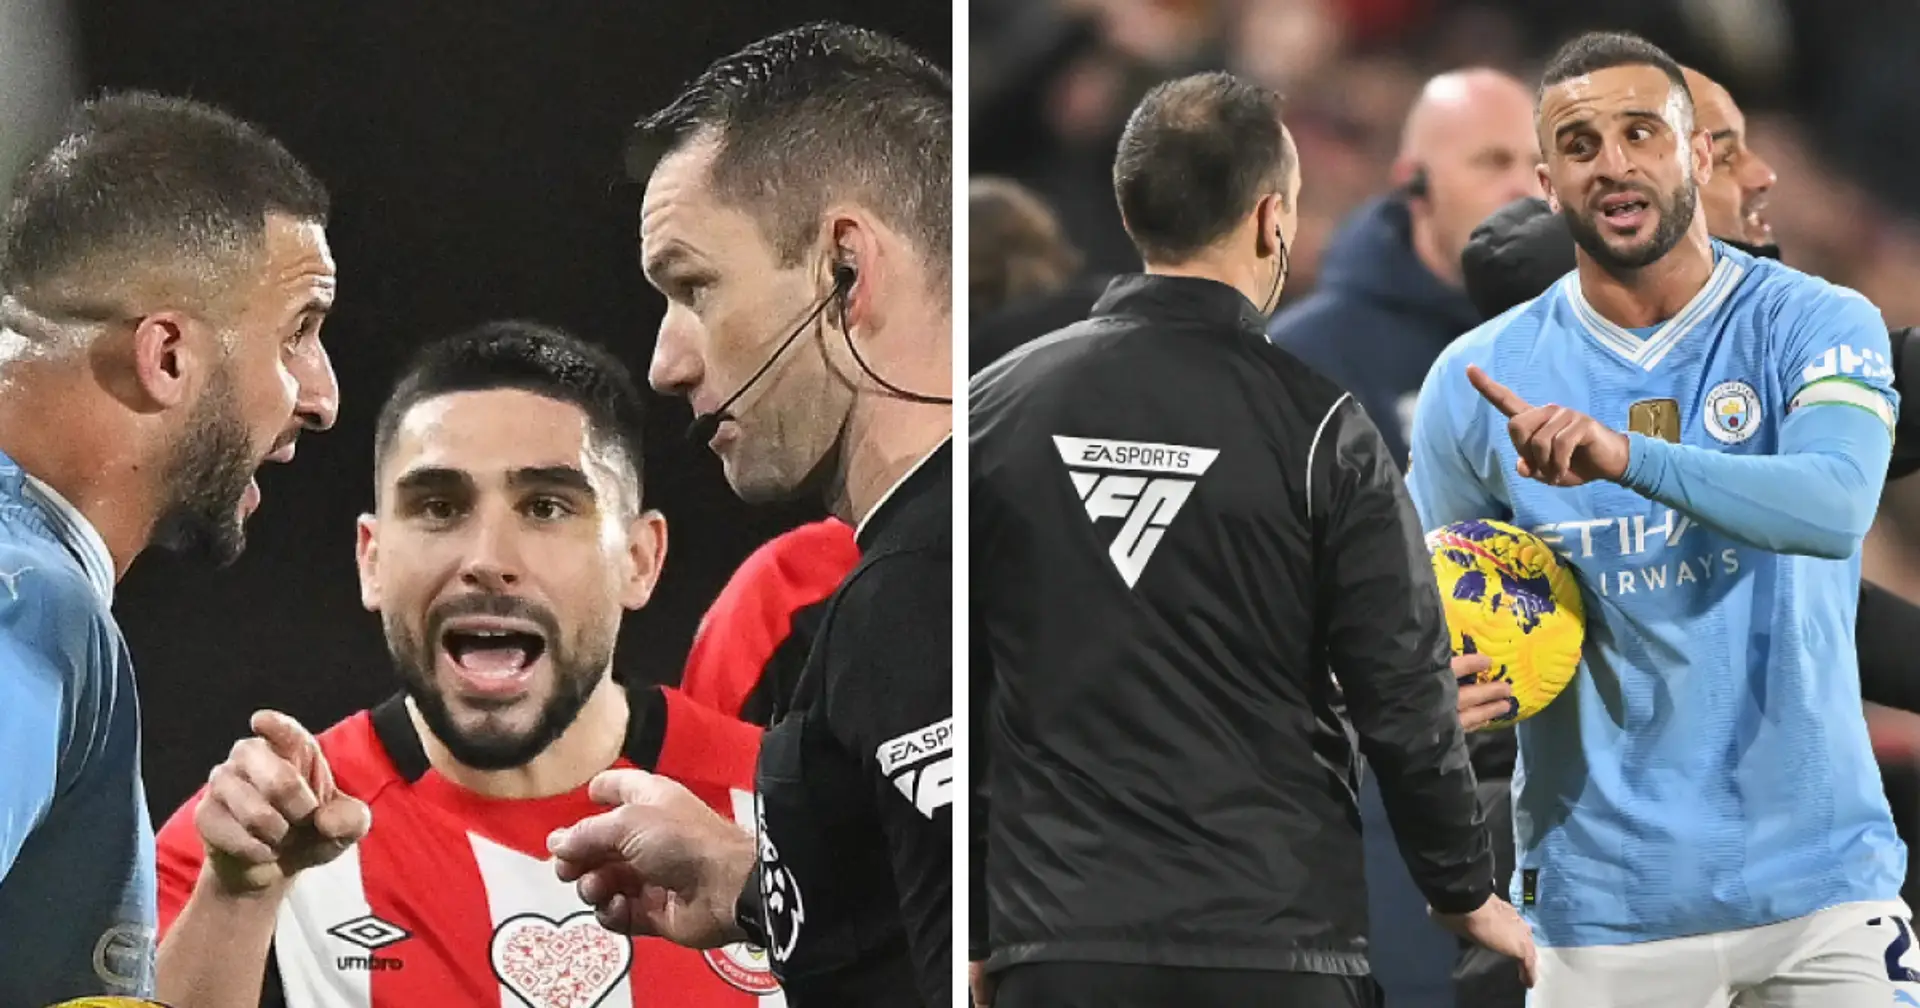 What did Neal Maupay say to Kyle Walker in fiery altercation? Guardiola refuses to comment